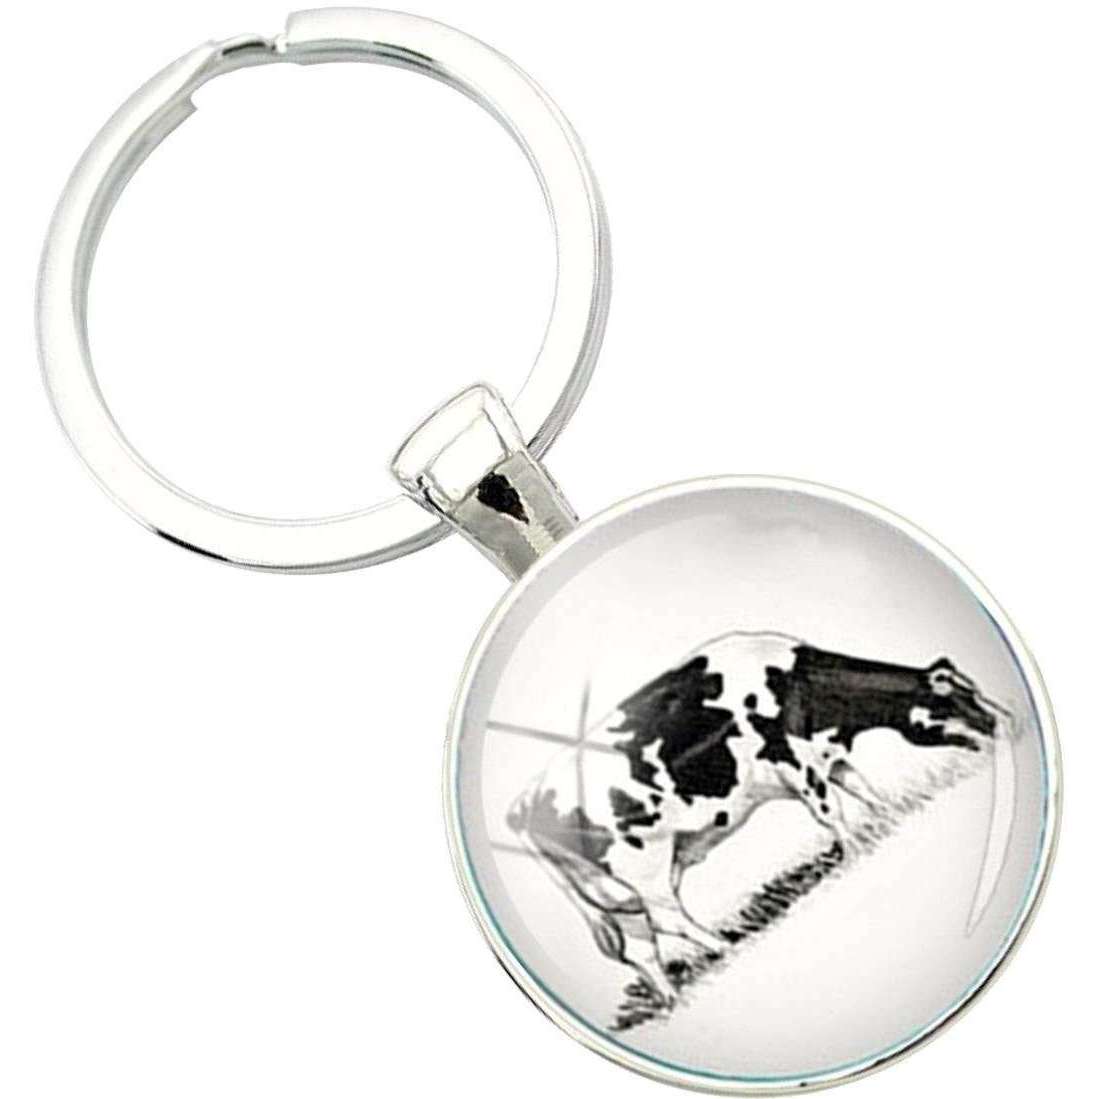 Bassin and Brown Cow Key Ring - Black/White